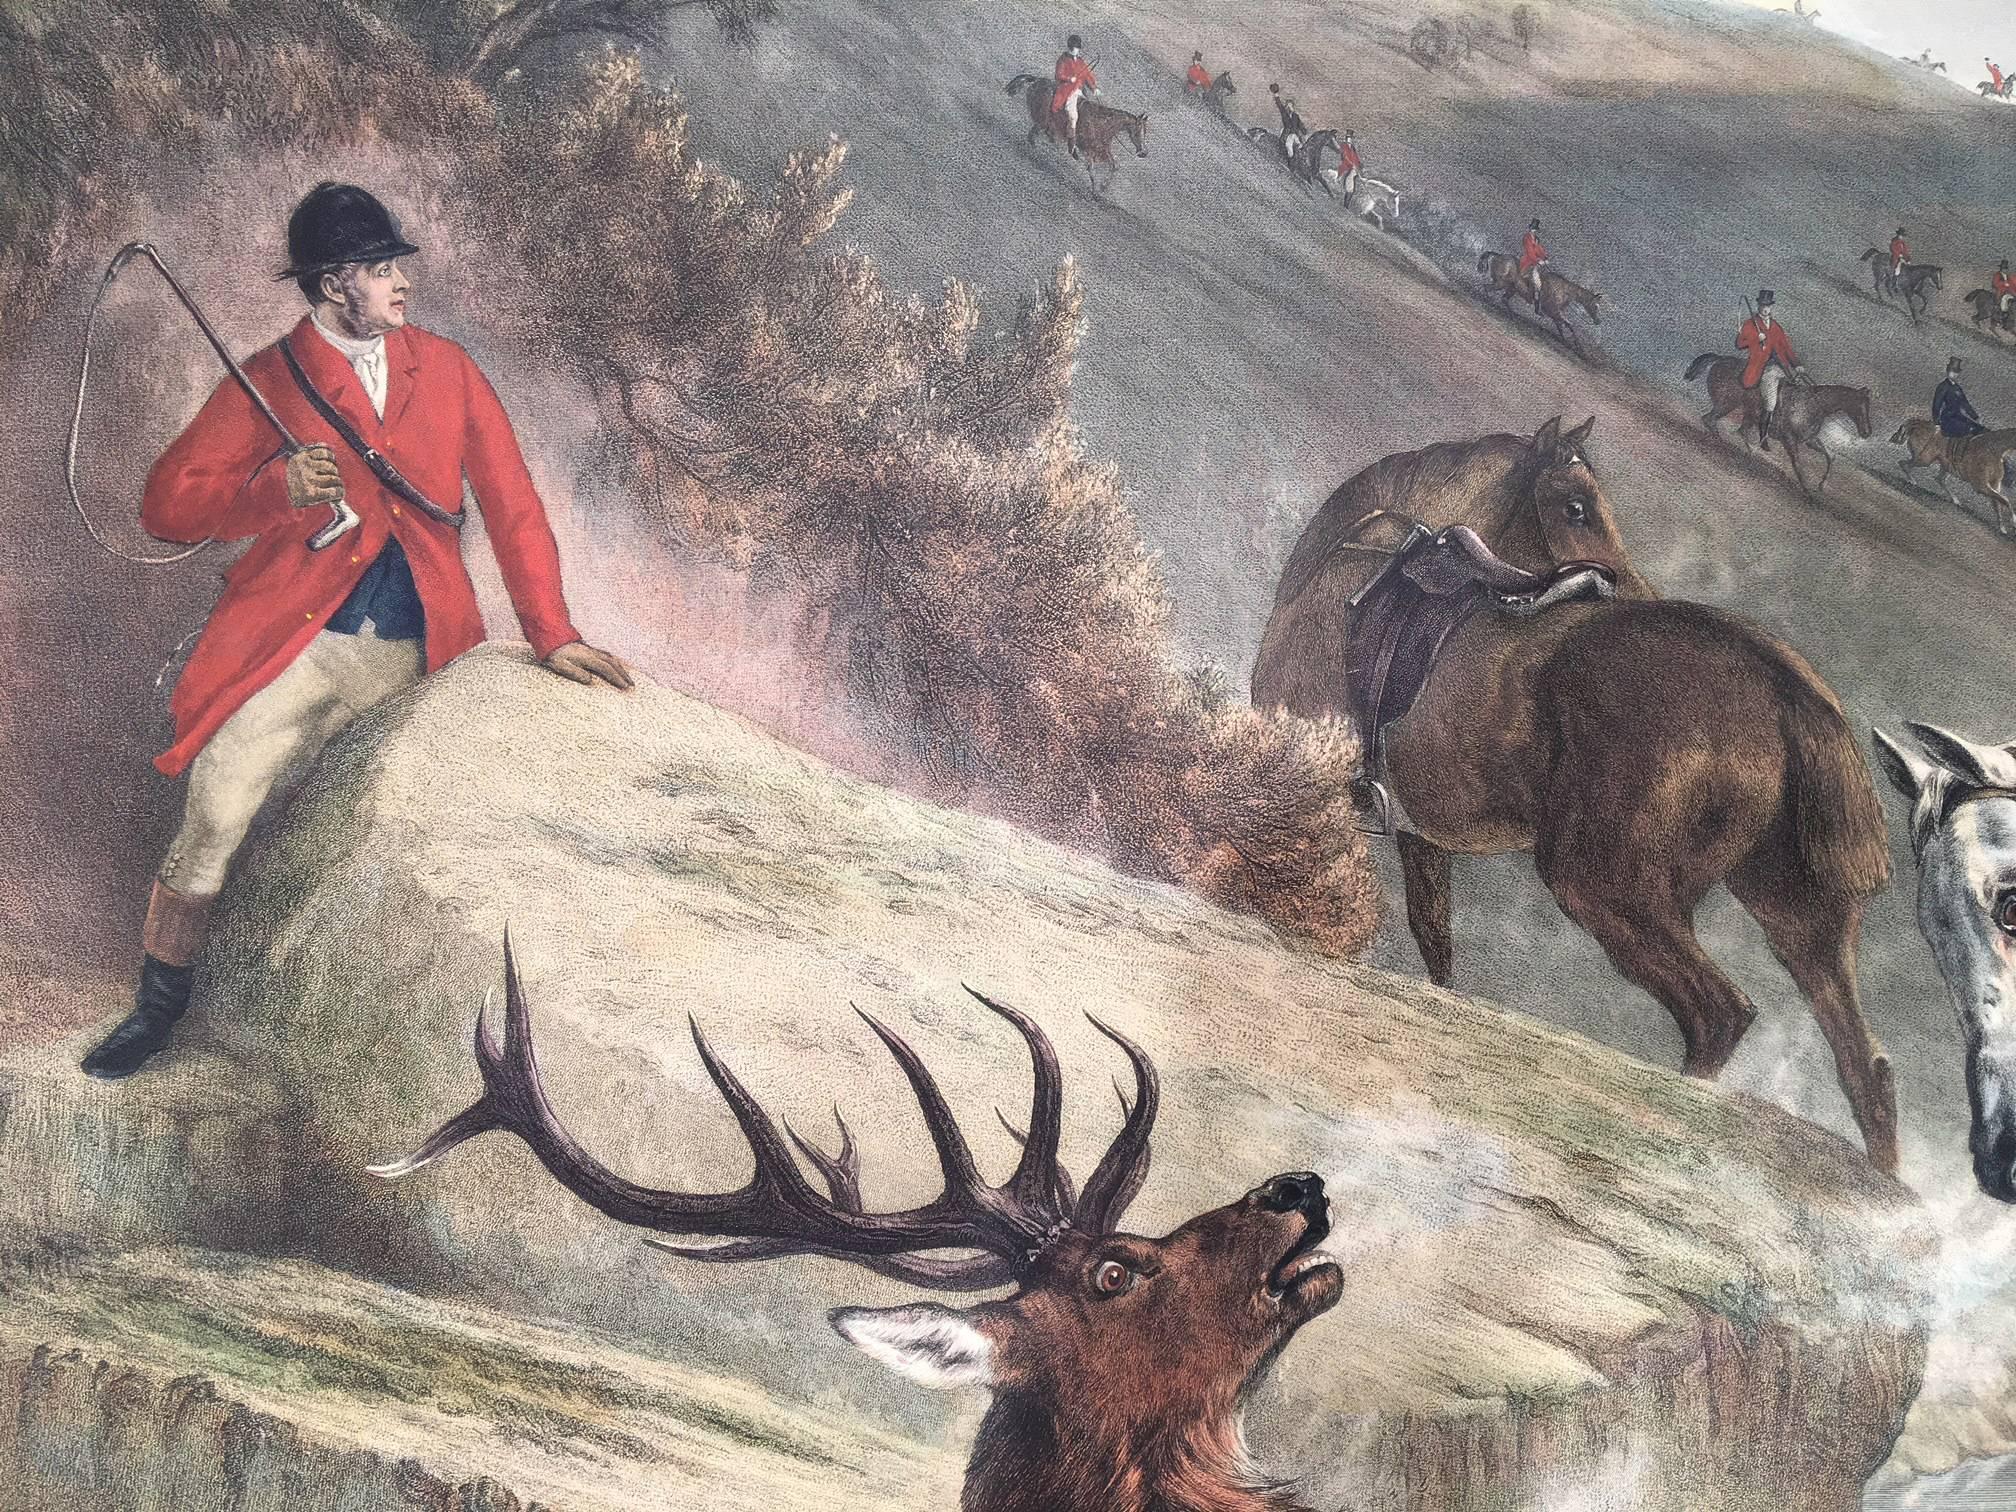 Hand-colored restrike engraving showing an Elk Hunt in Exmoor Forest, from an original engraving by Alfred Lucas (1841 – 1886) after Samuel John Carter's (1835 – 1892) oil painting. Published in London, 1888. 

Lucas was a line, mezzotint and